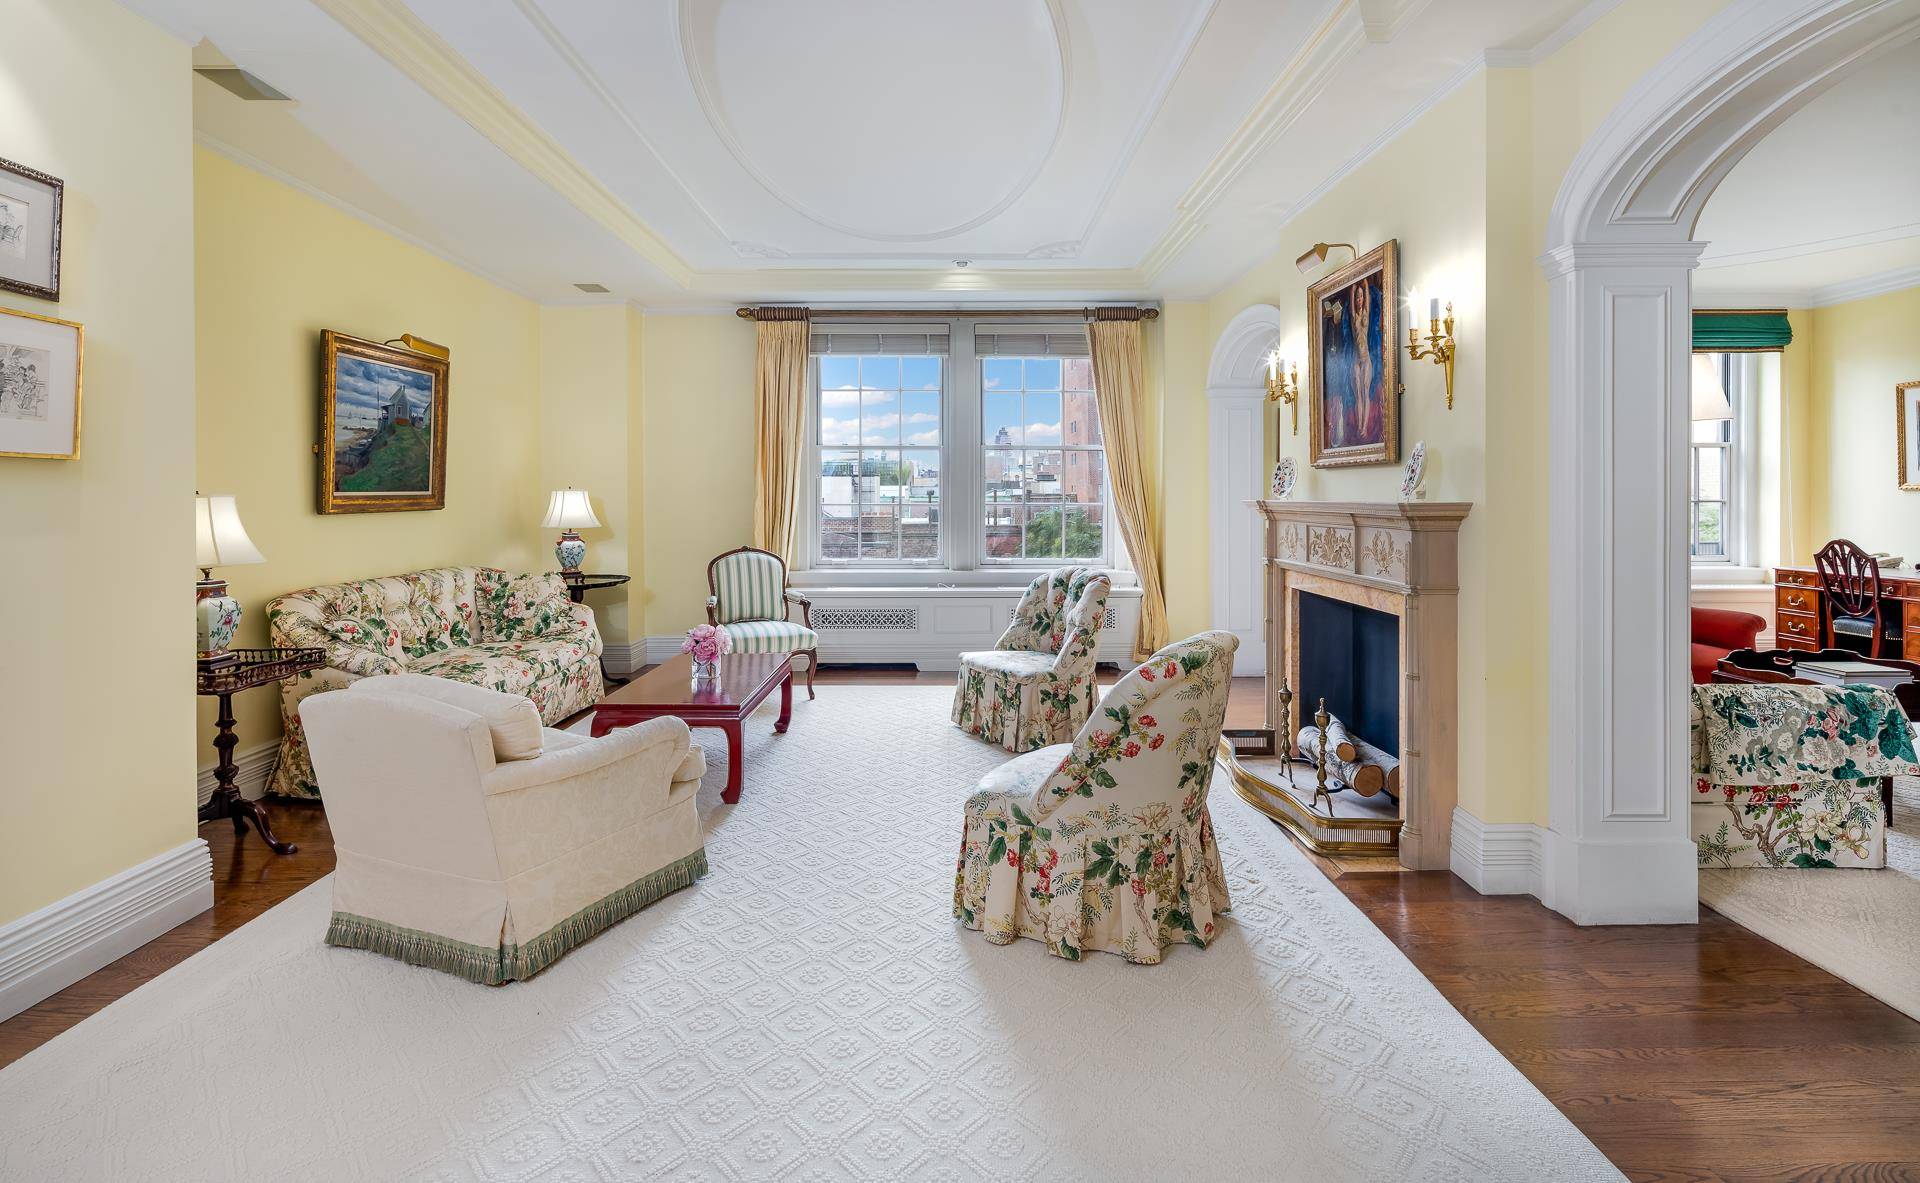 Spacious 2 Bedroom Home in a Park Avenue CoopEnter through a grand gallery with a domed ceiling and hidden alcove lighting.